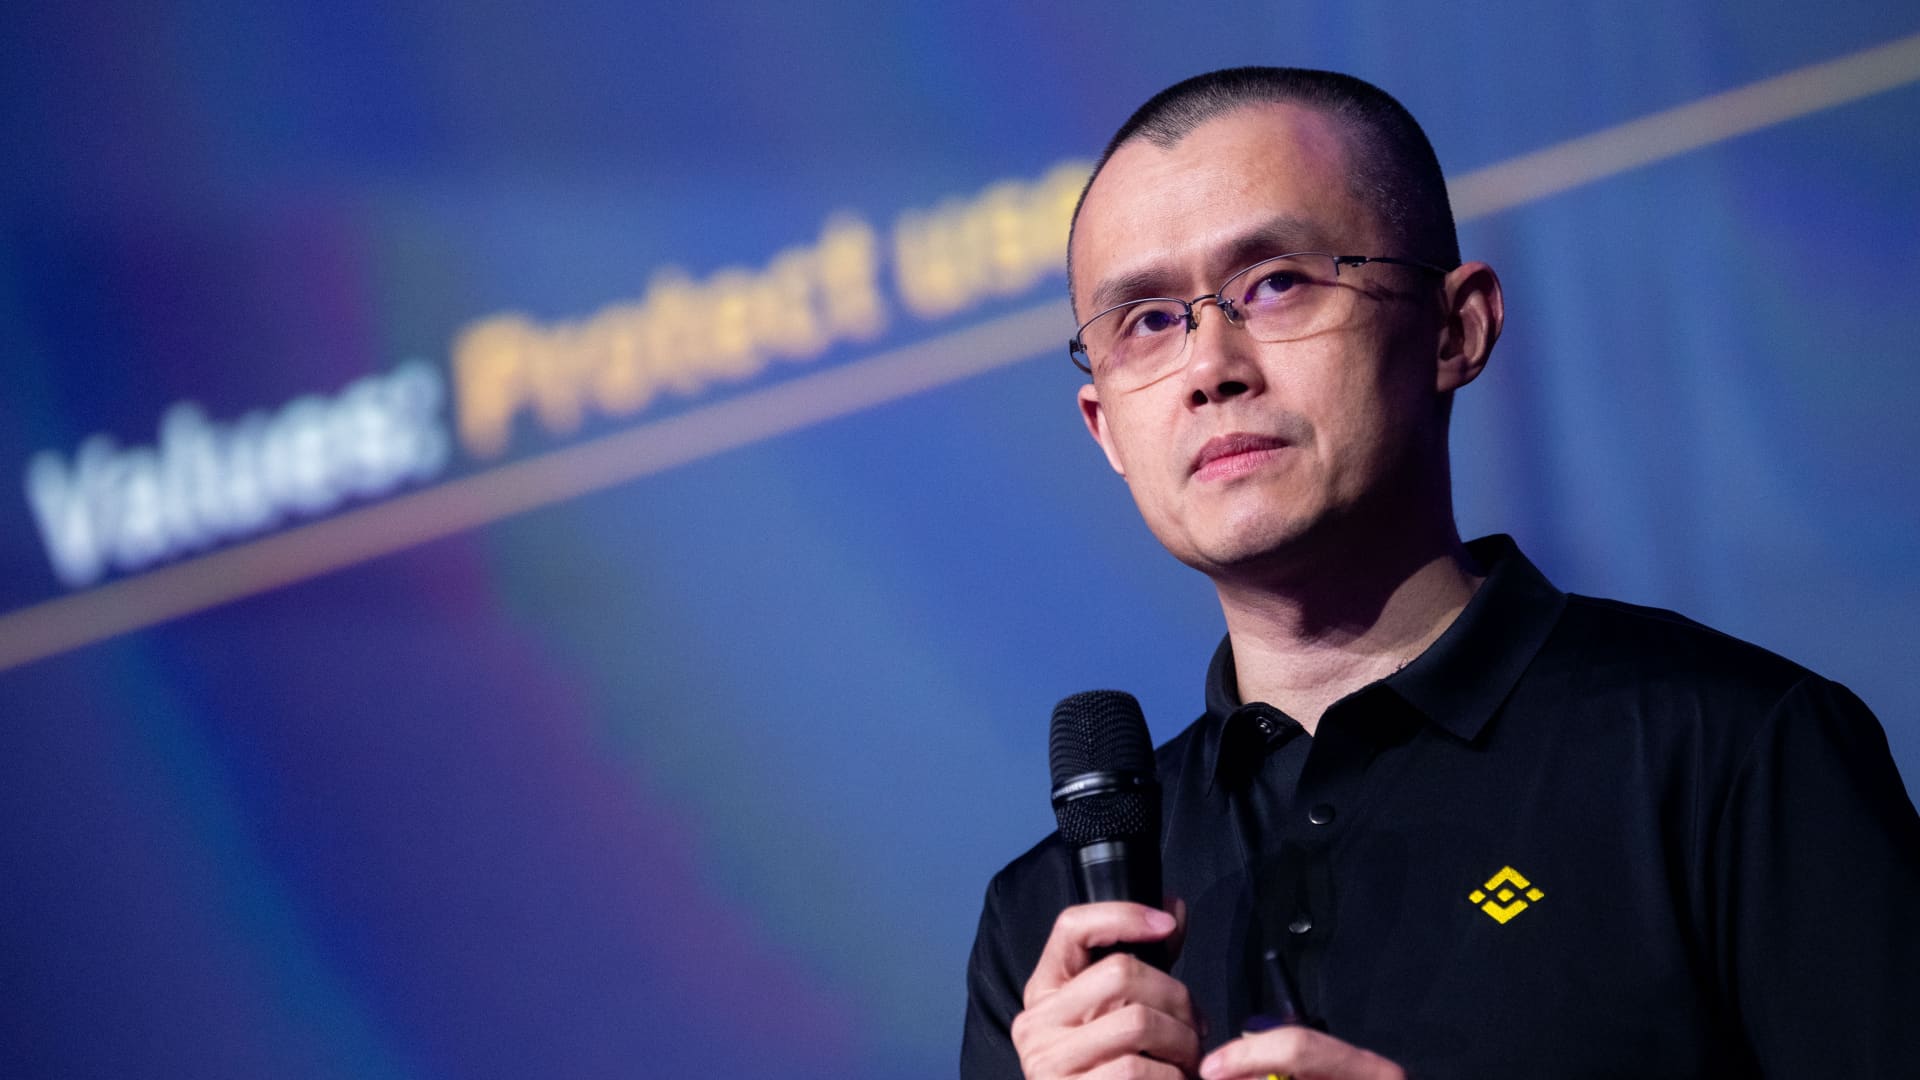 Binance CEO Changpeng Zhao to plead guilty to federal charges, step down